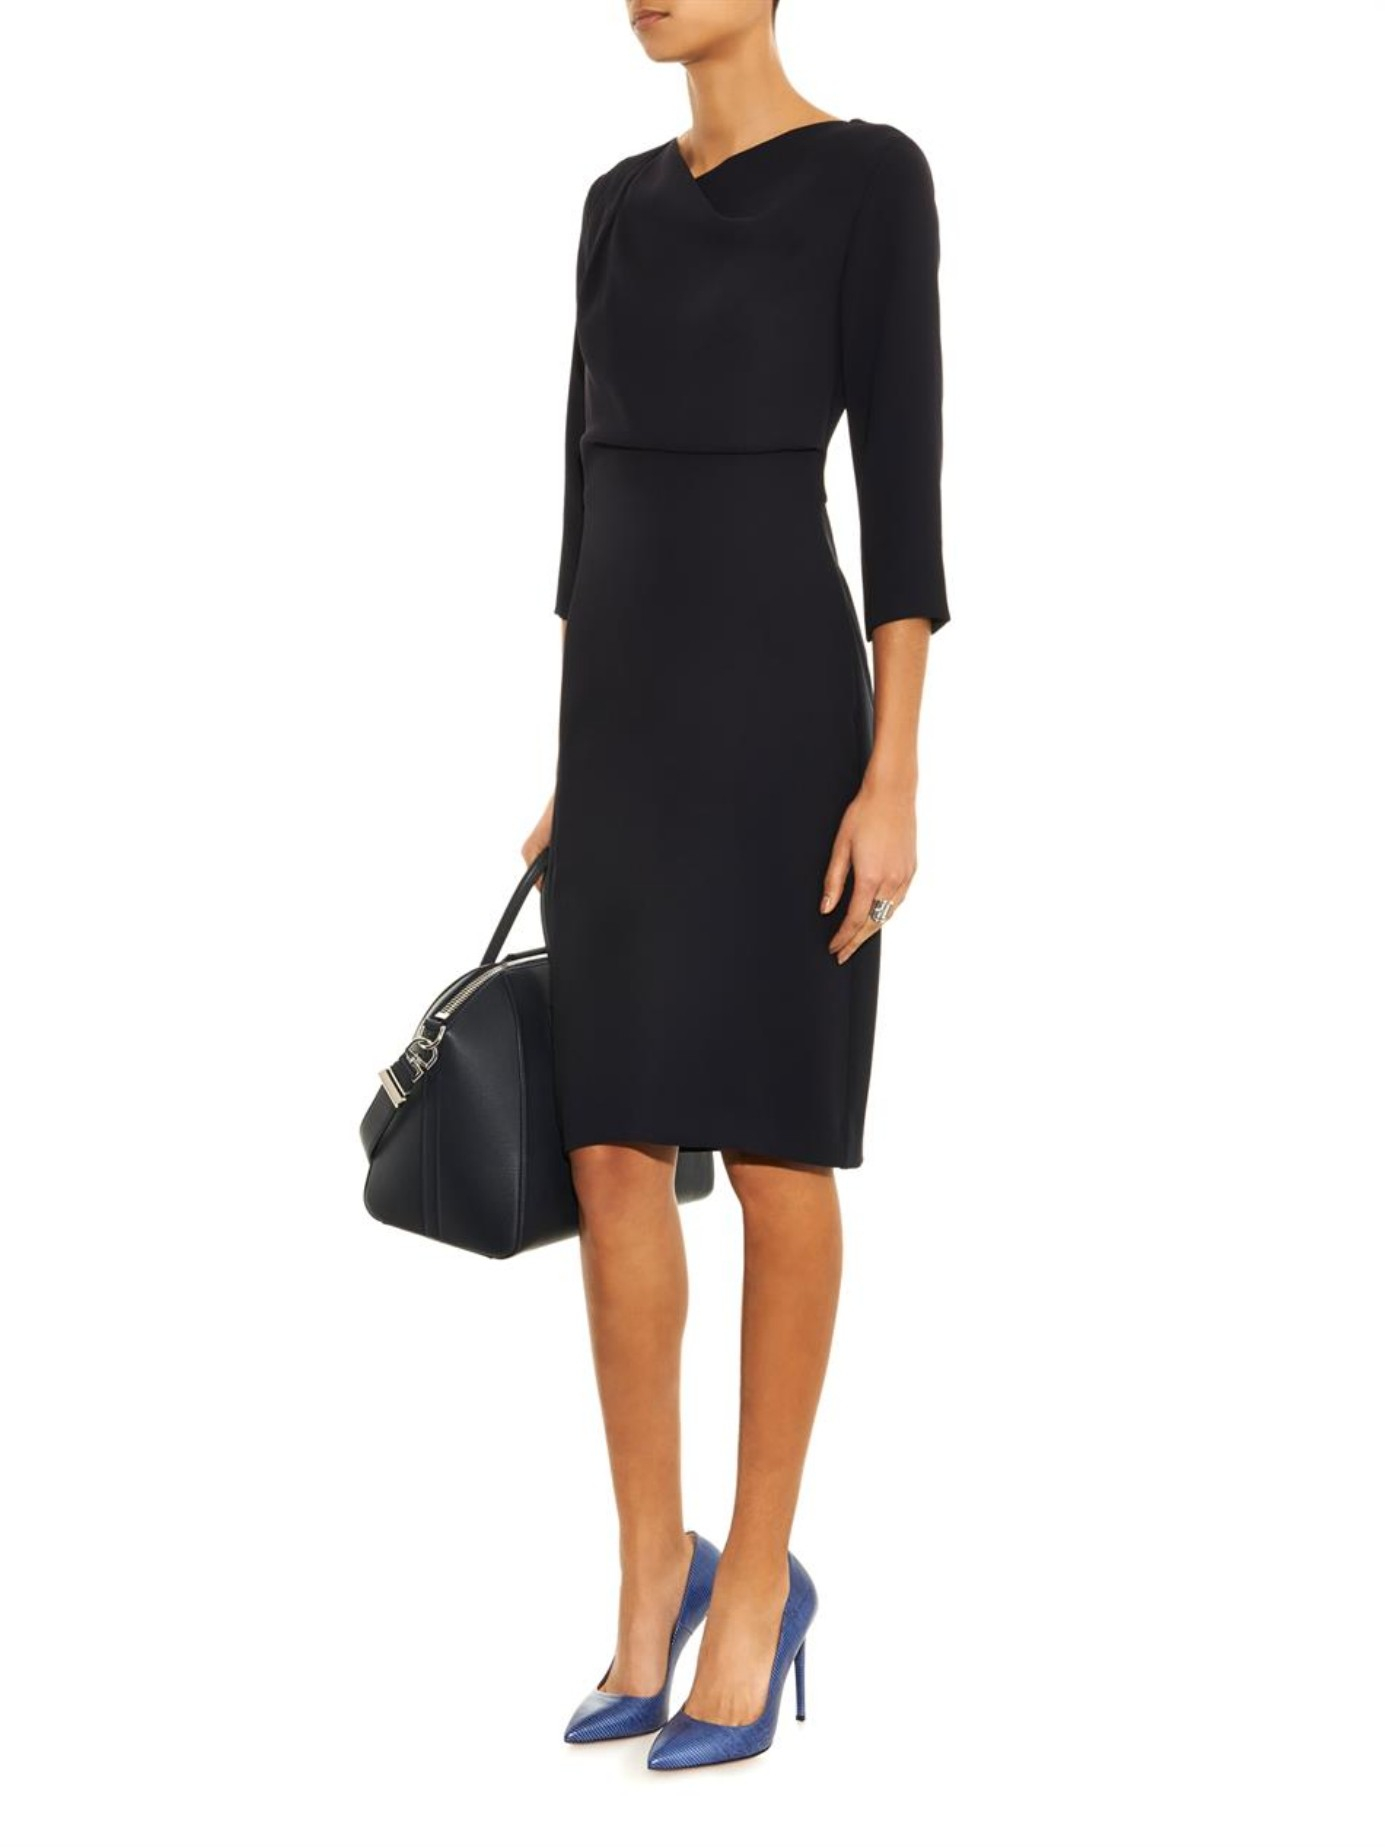 Max Mara Synthetic Lume Dress in Navy (Blue) - Lyst